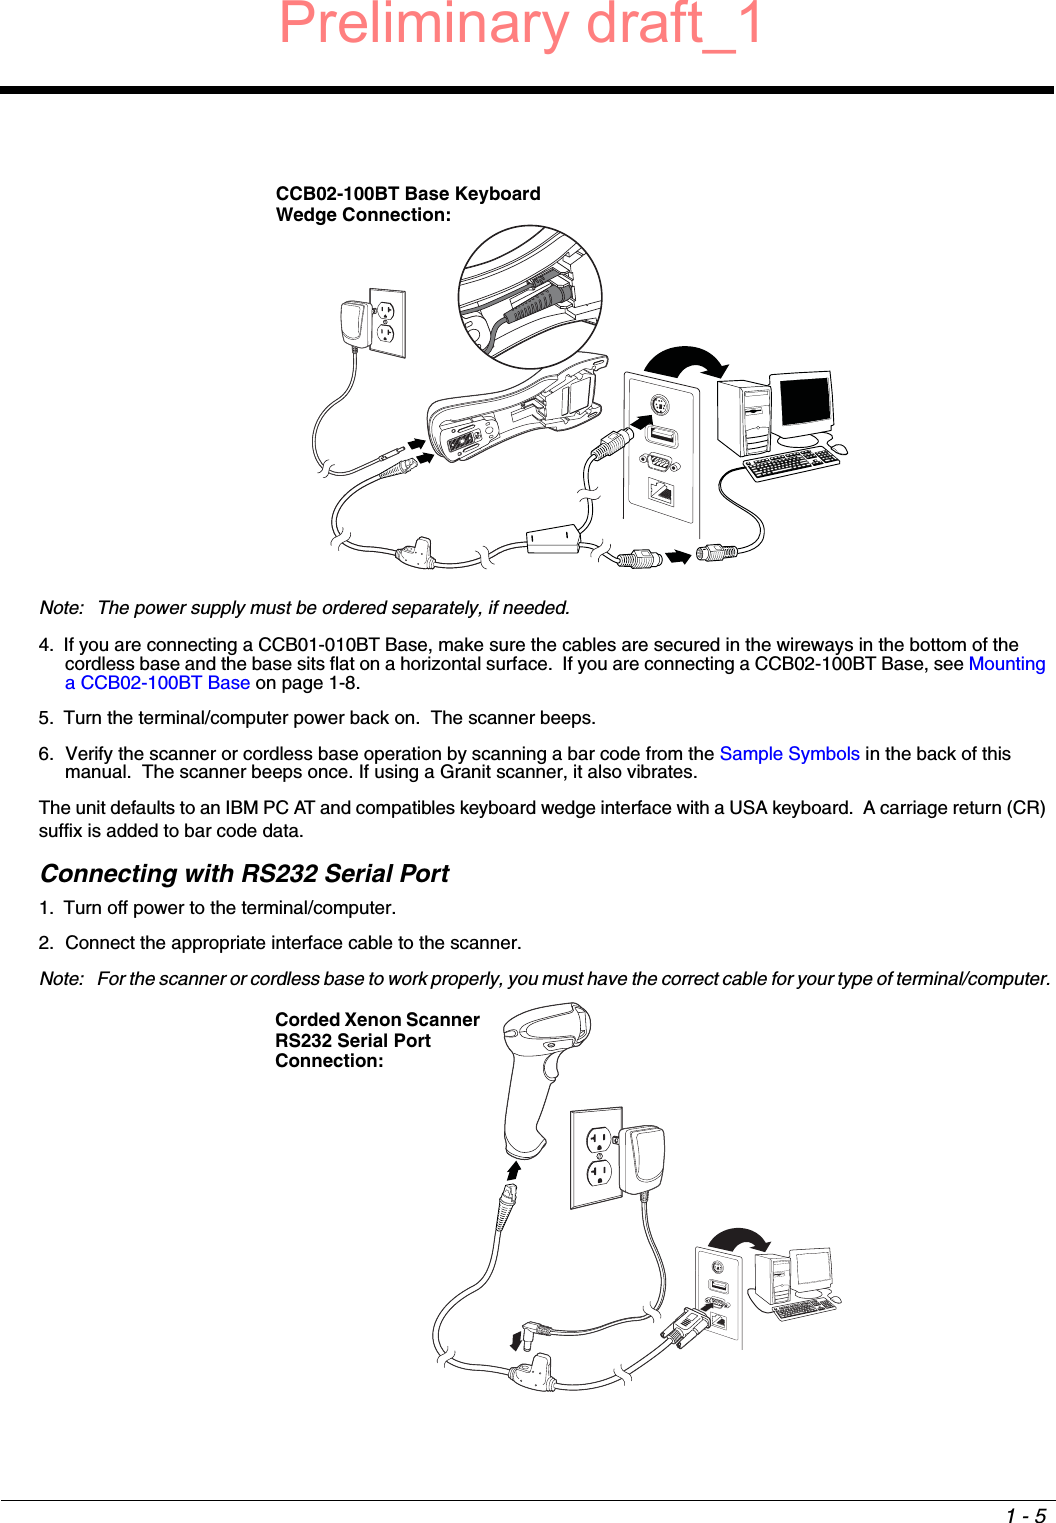 Honeywell quick connect user manual